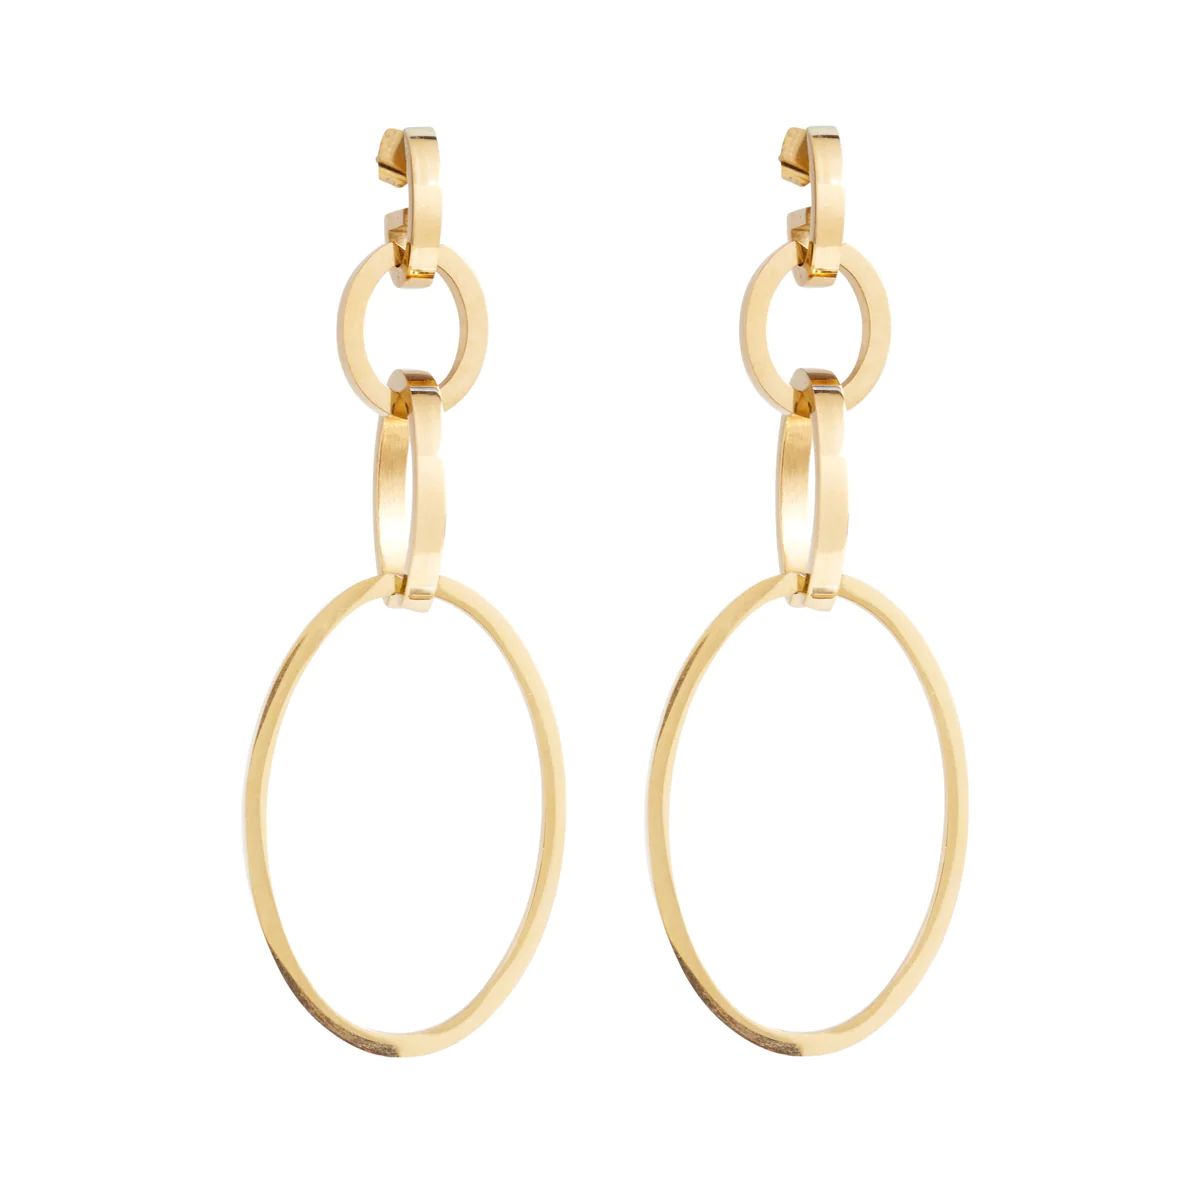 Cassio Earrings | Curateur